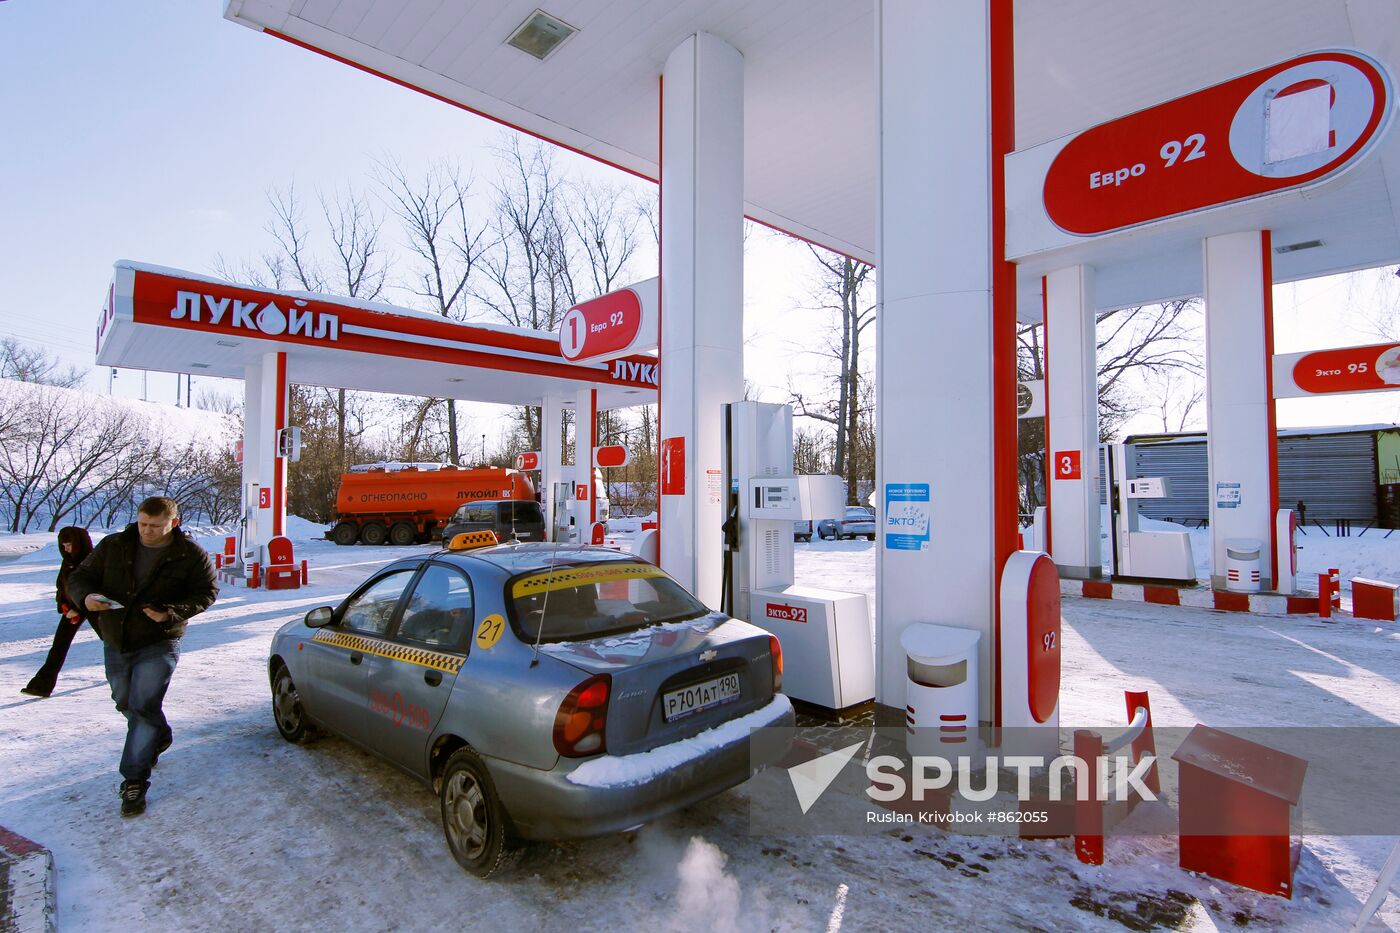 Retail gasoline prices rose in Moscow since beginning of year